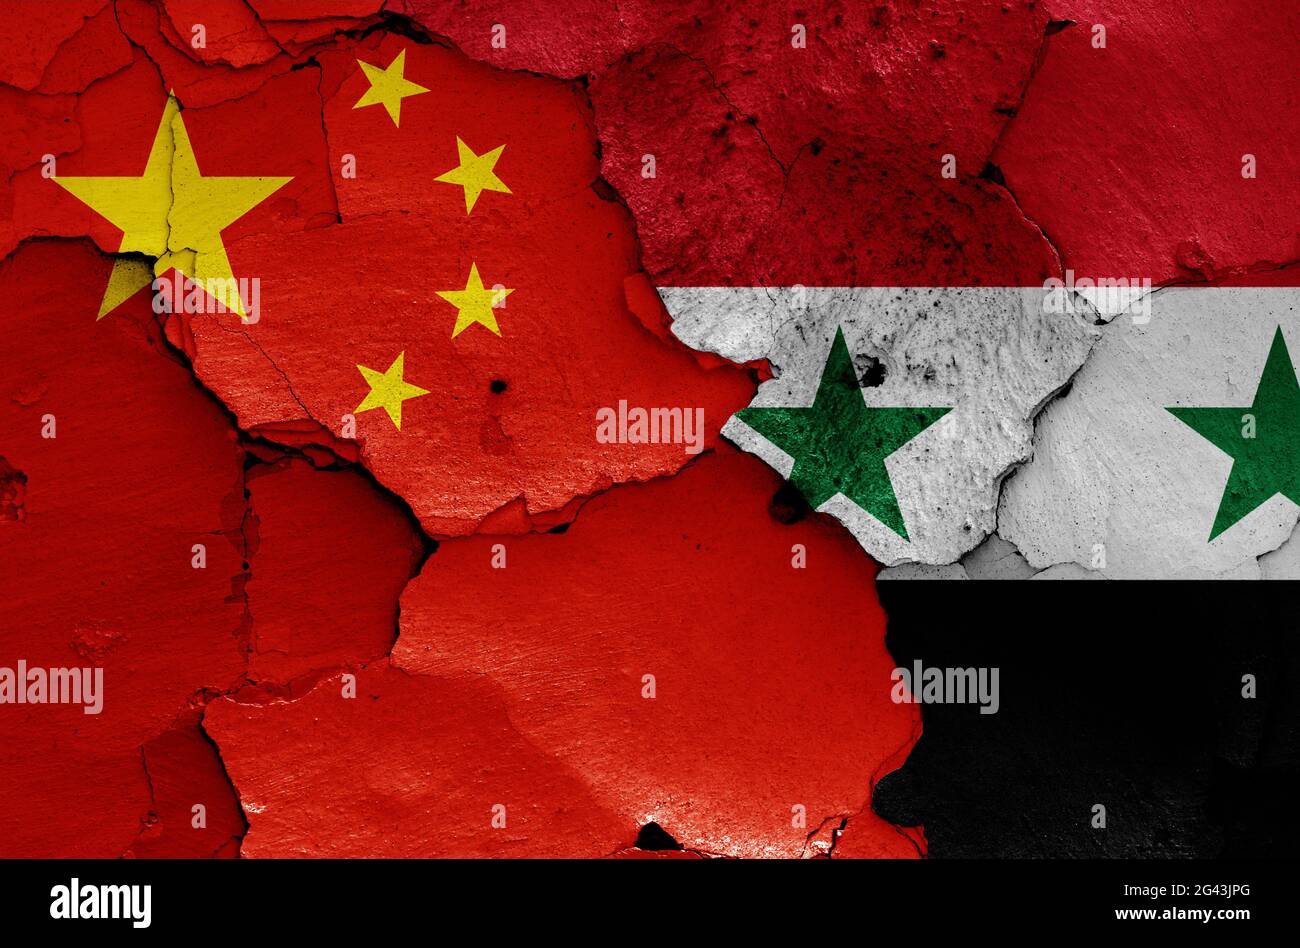 Flags of China and Syria painted on cracked wall Stock Photo